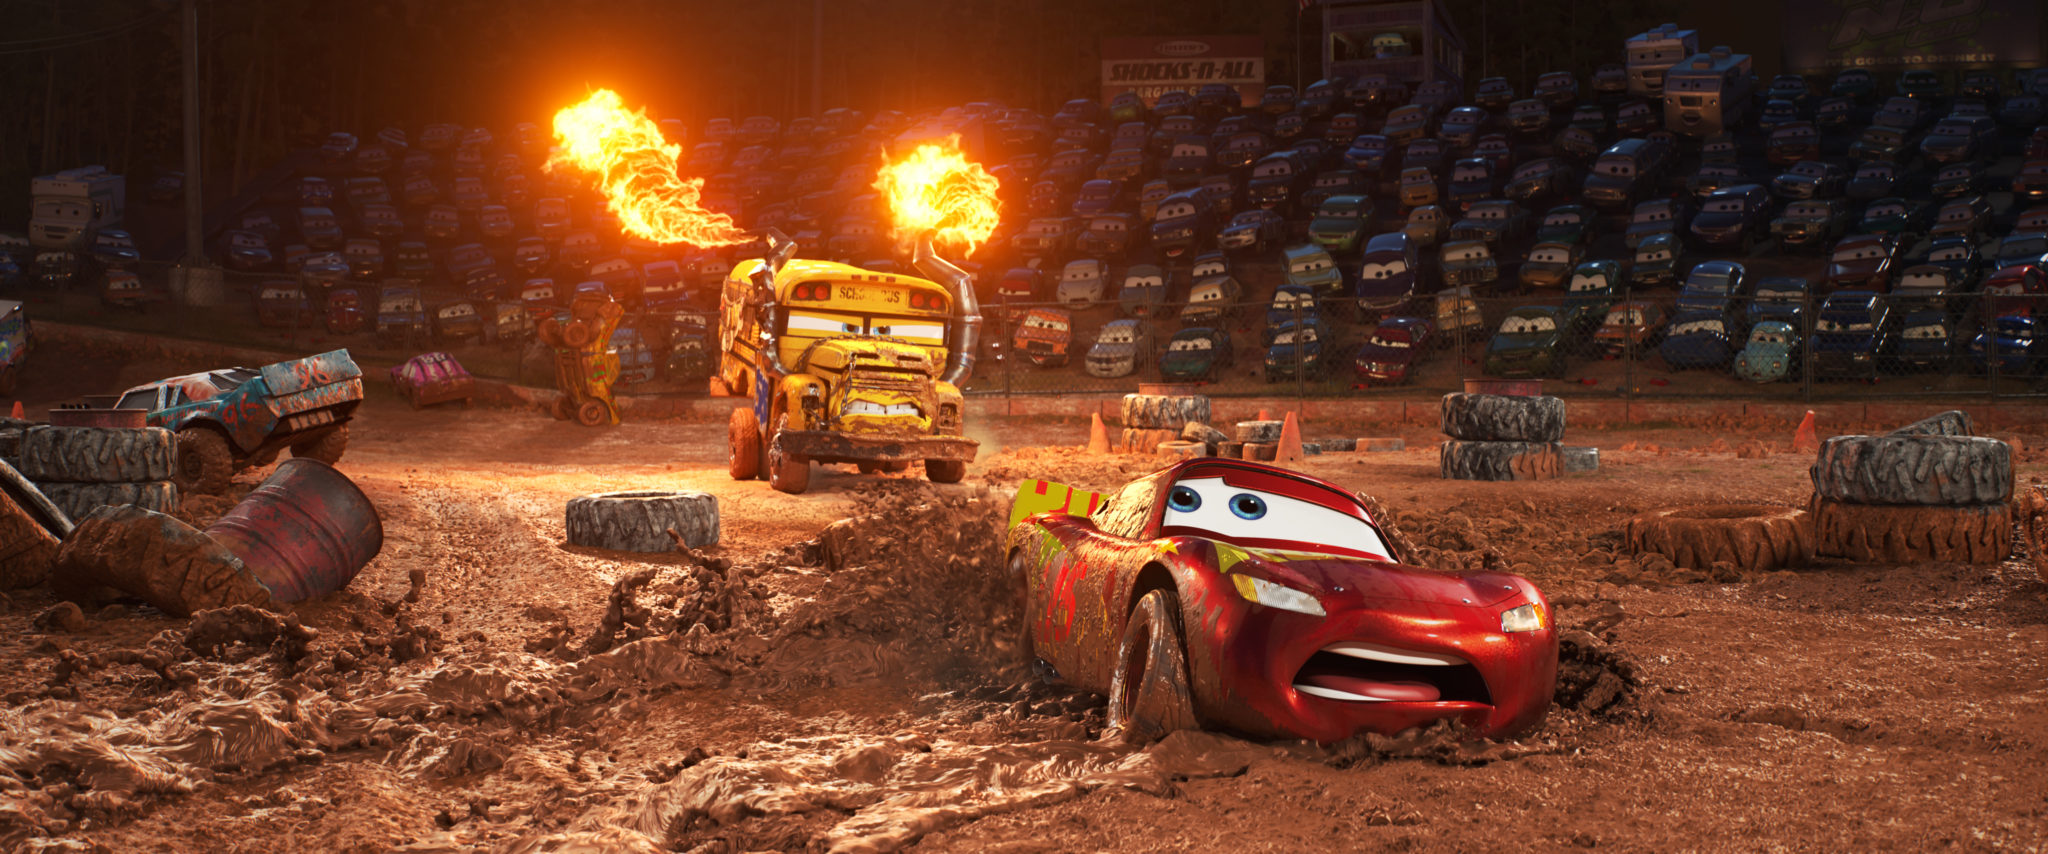 Take off with an all New Cars 3 Trailer